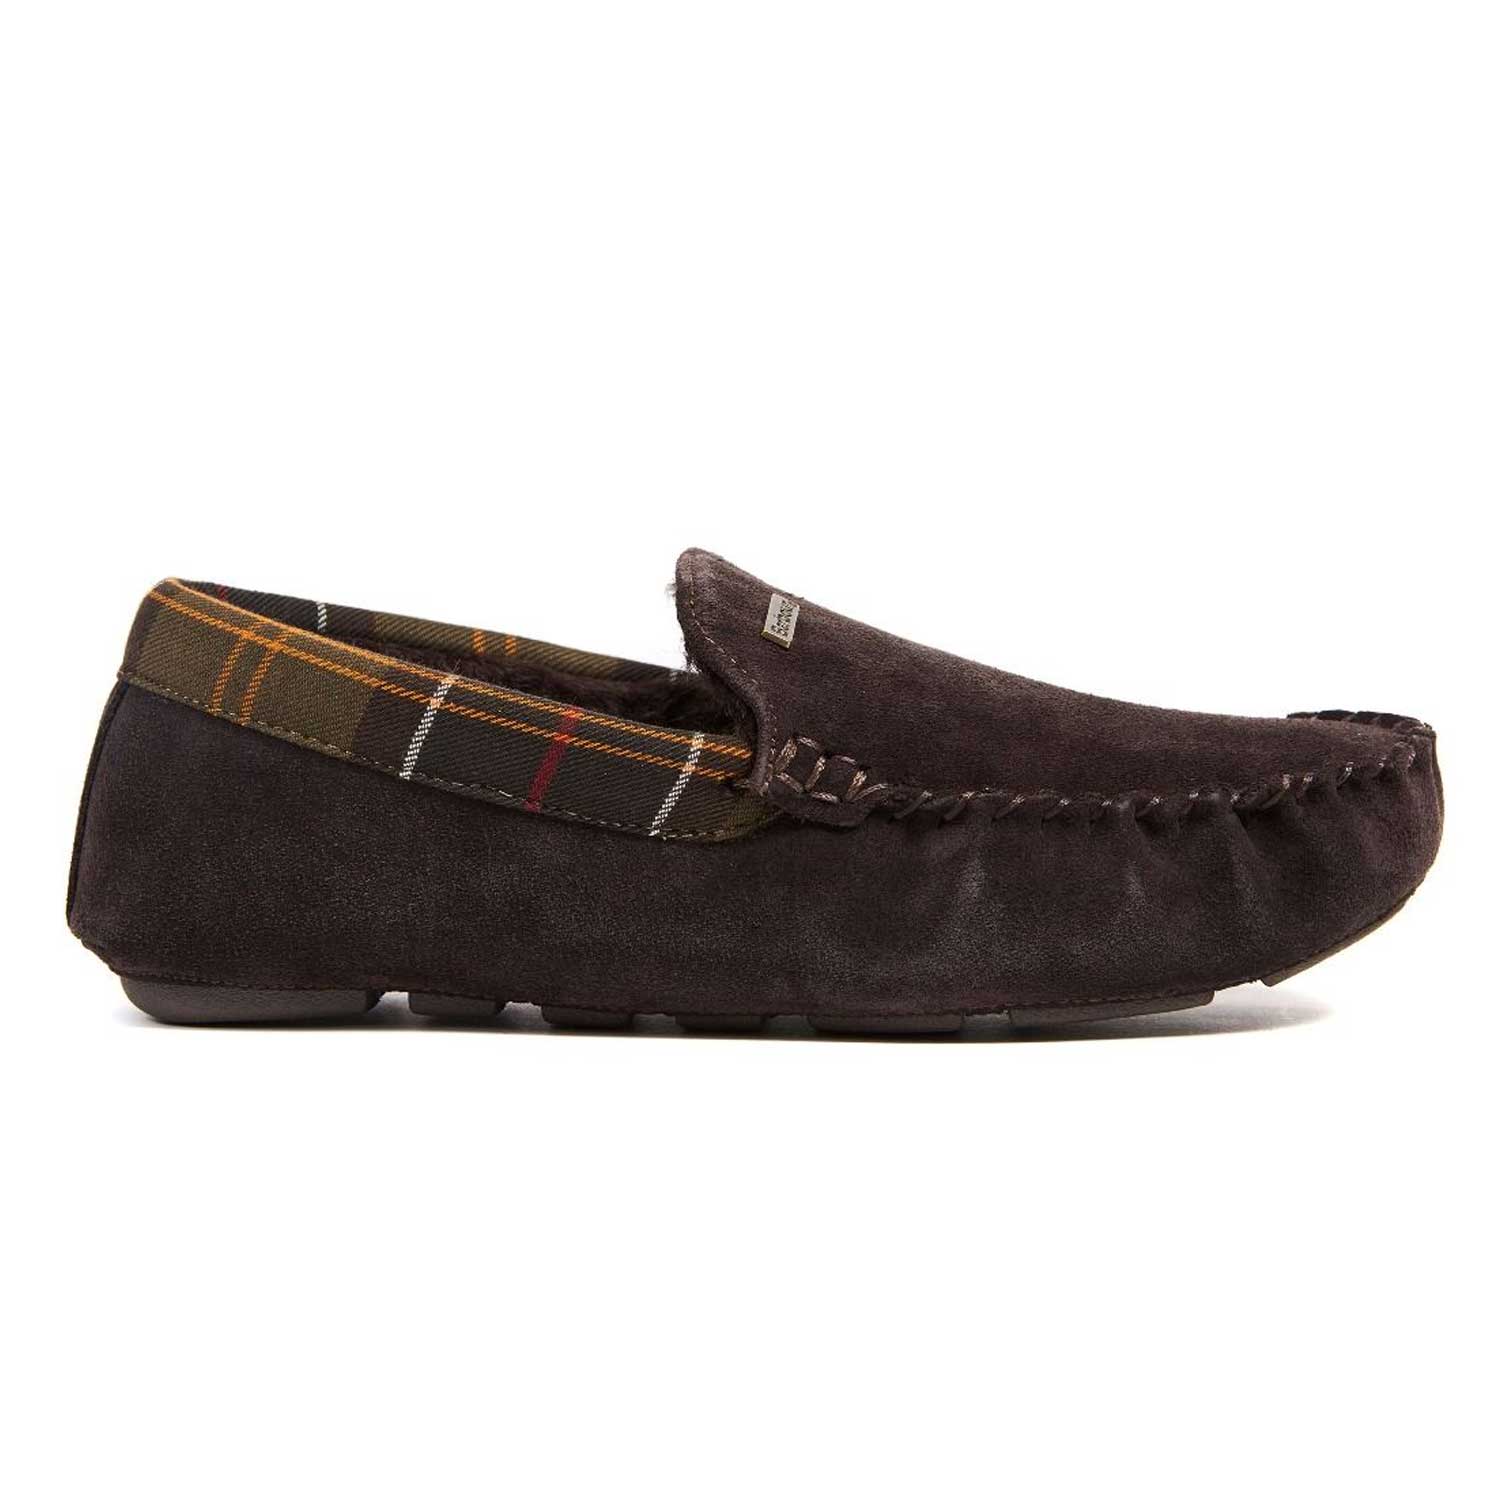 BARBOUR Slippers - Mens Monty Moccasin - Brown